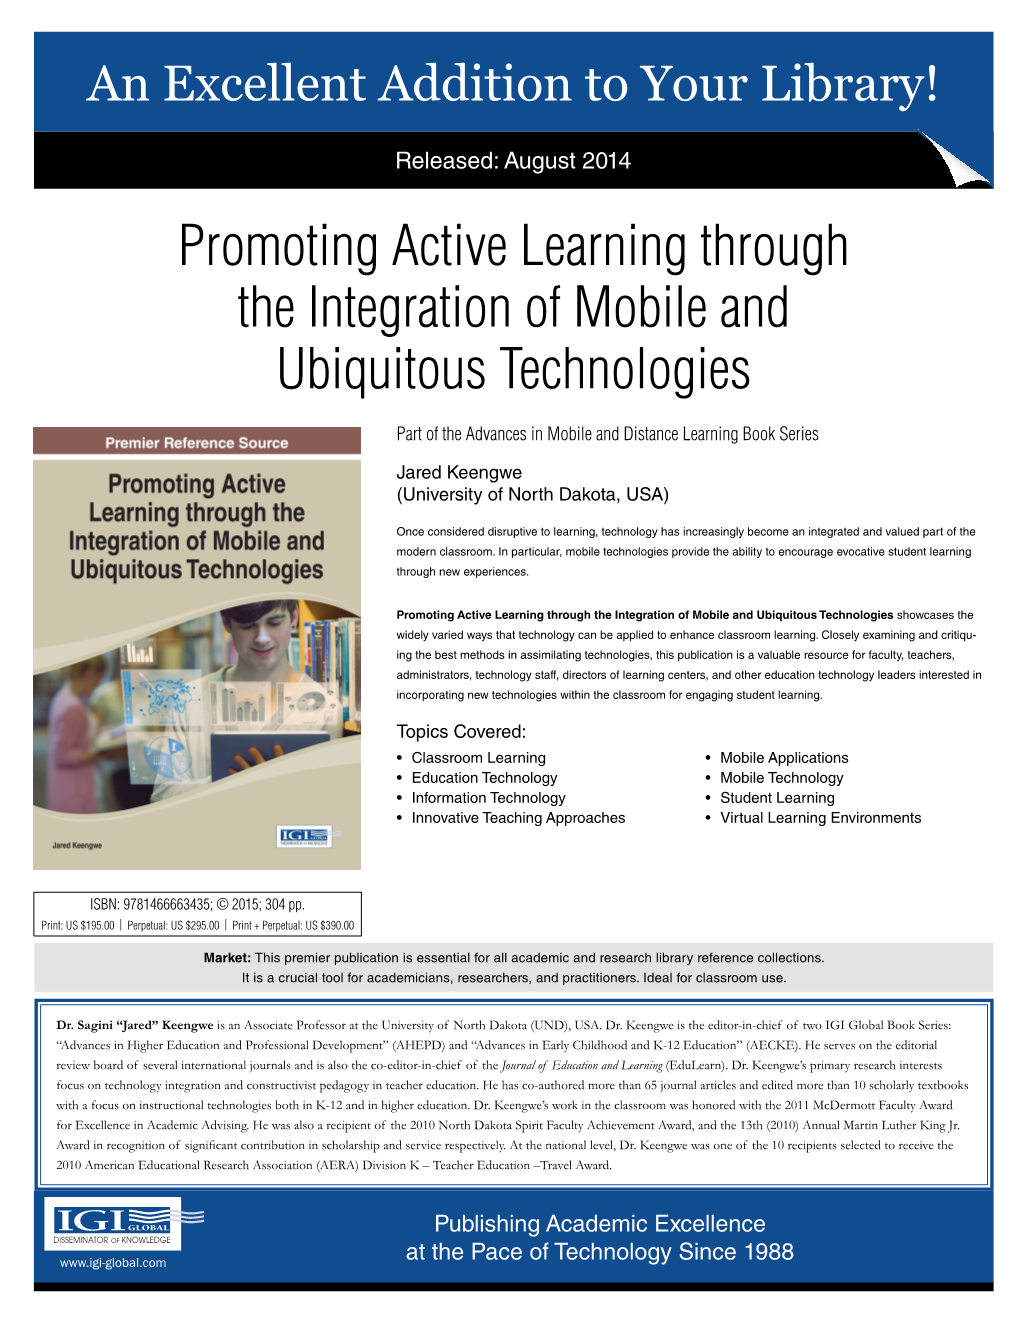 Promoting Active Learning Through the Integration of Mobile and Ubiquitous Technologies